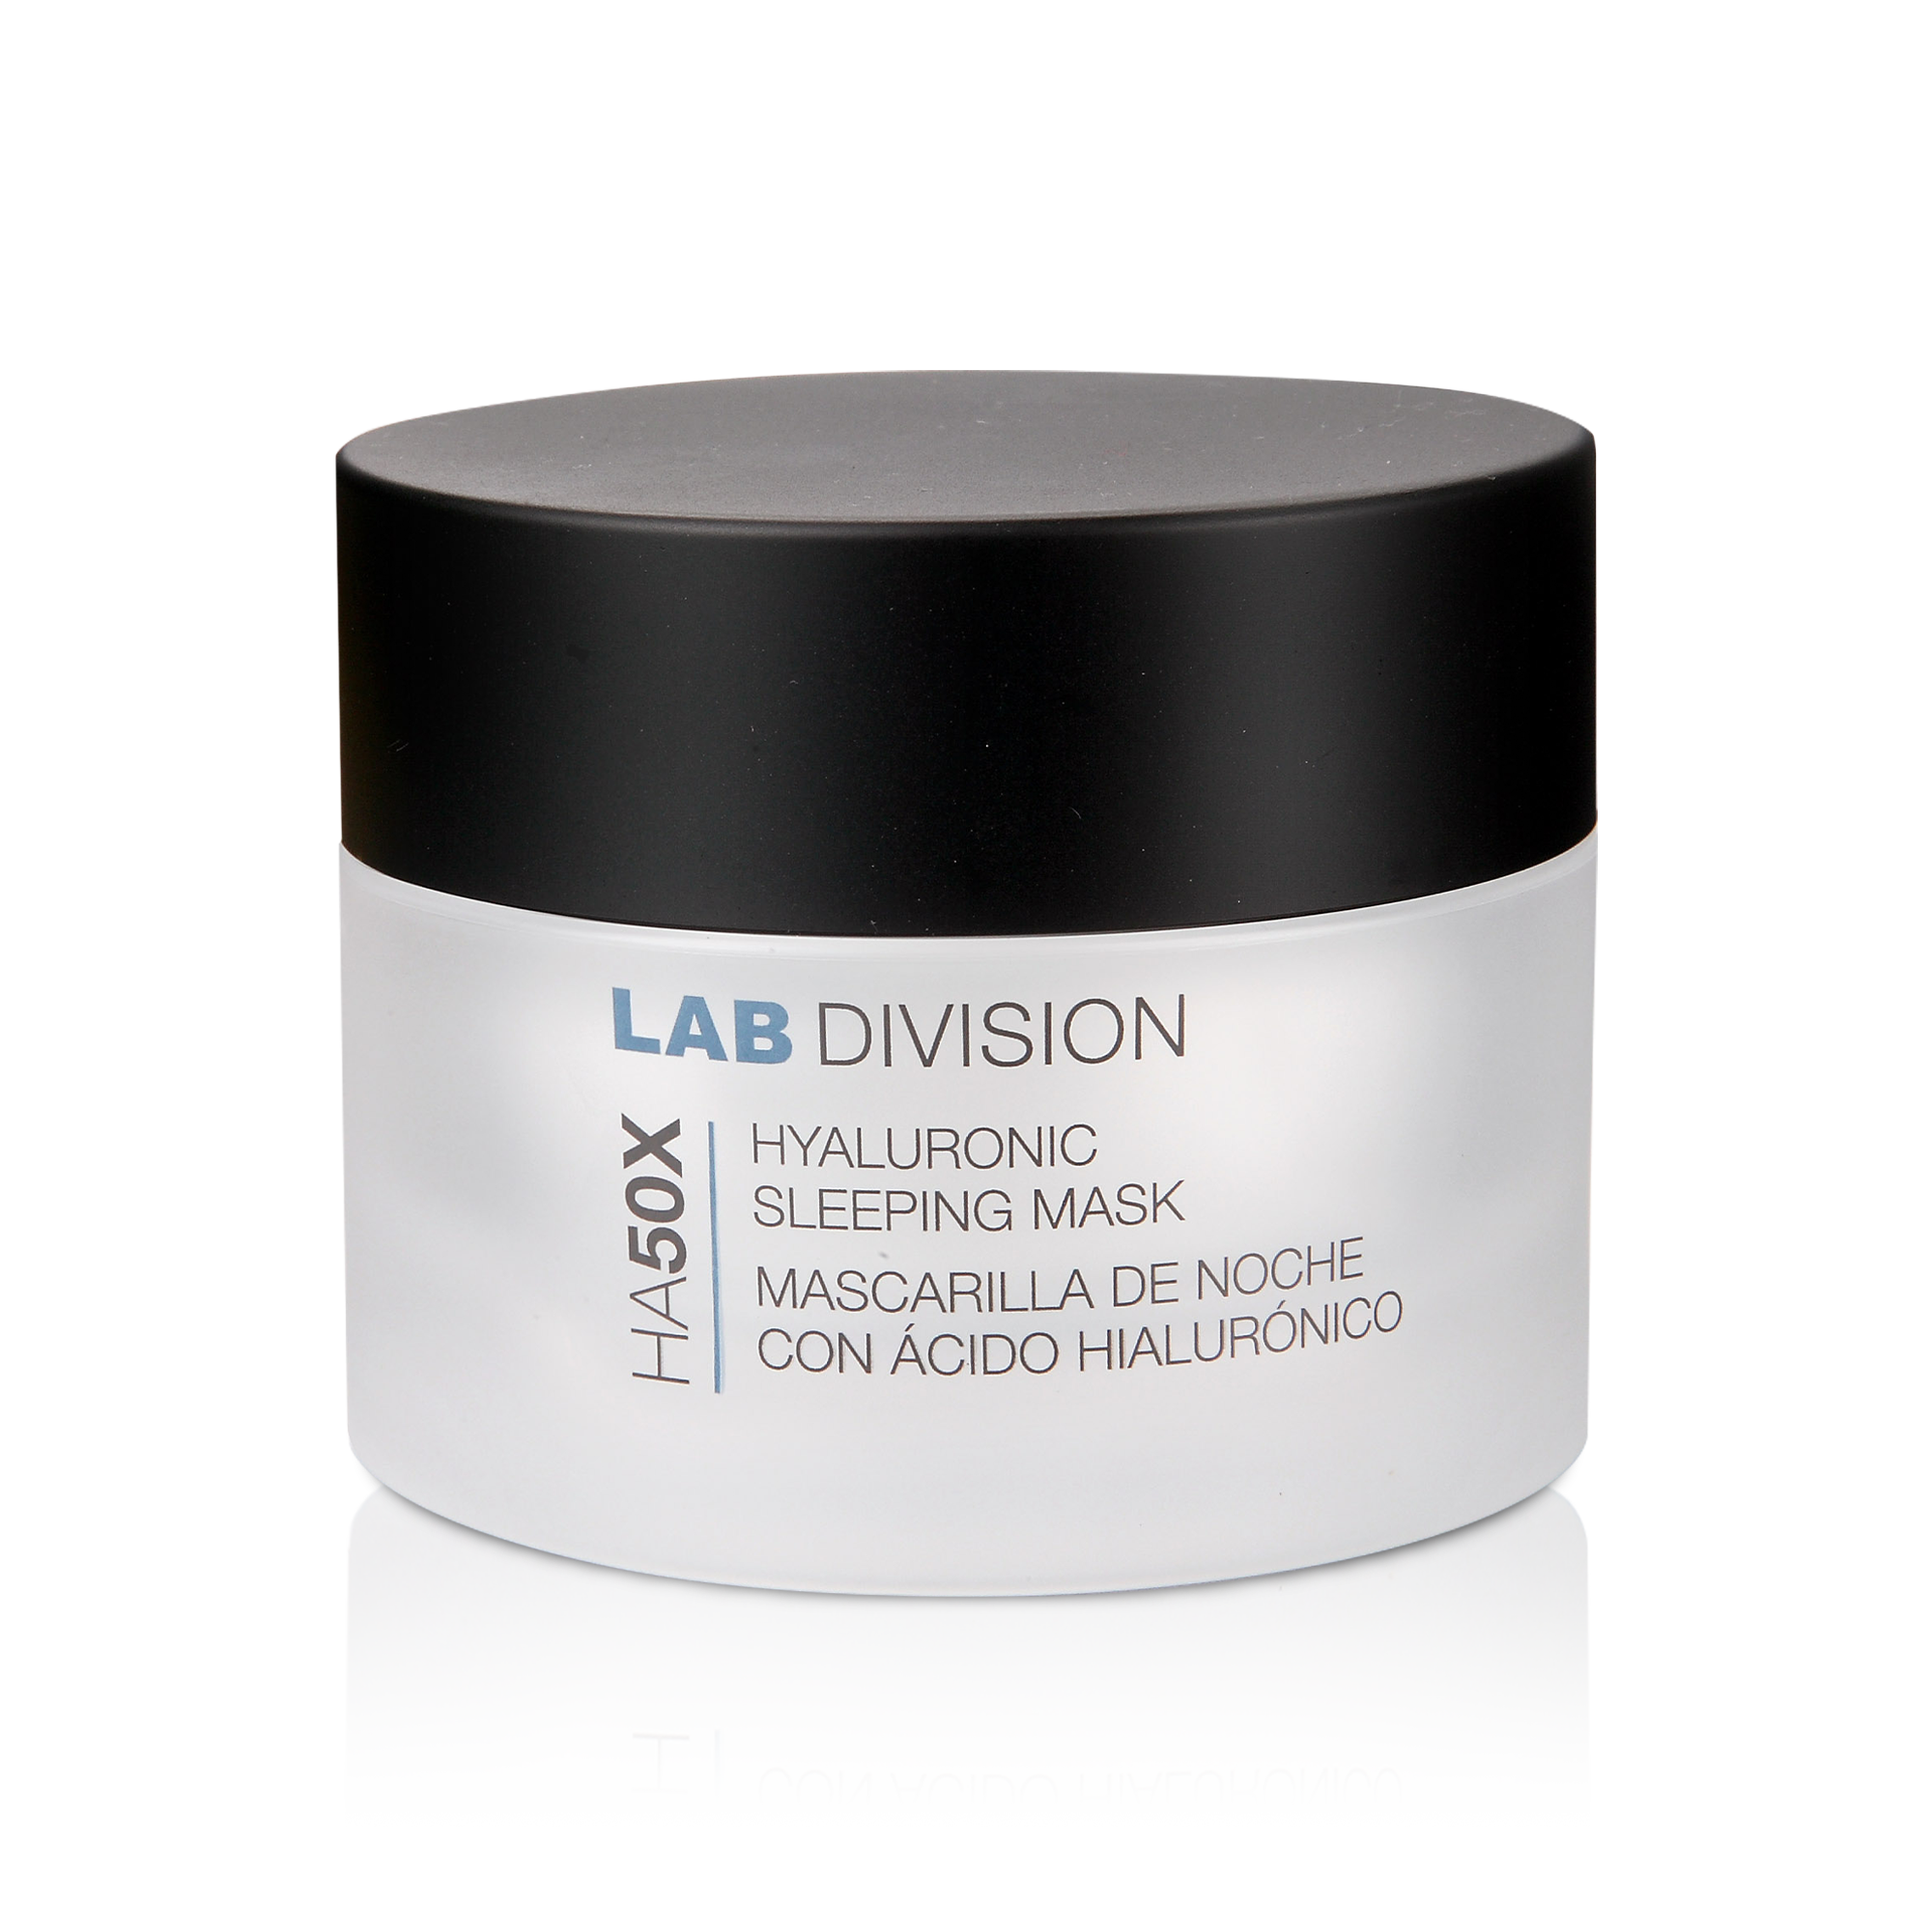 Lab Division HA50X Hyaluronic Sleeping Mask